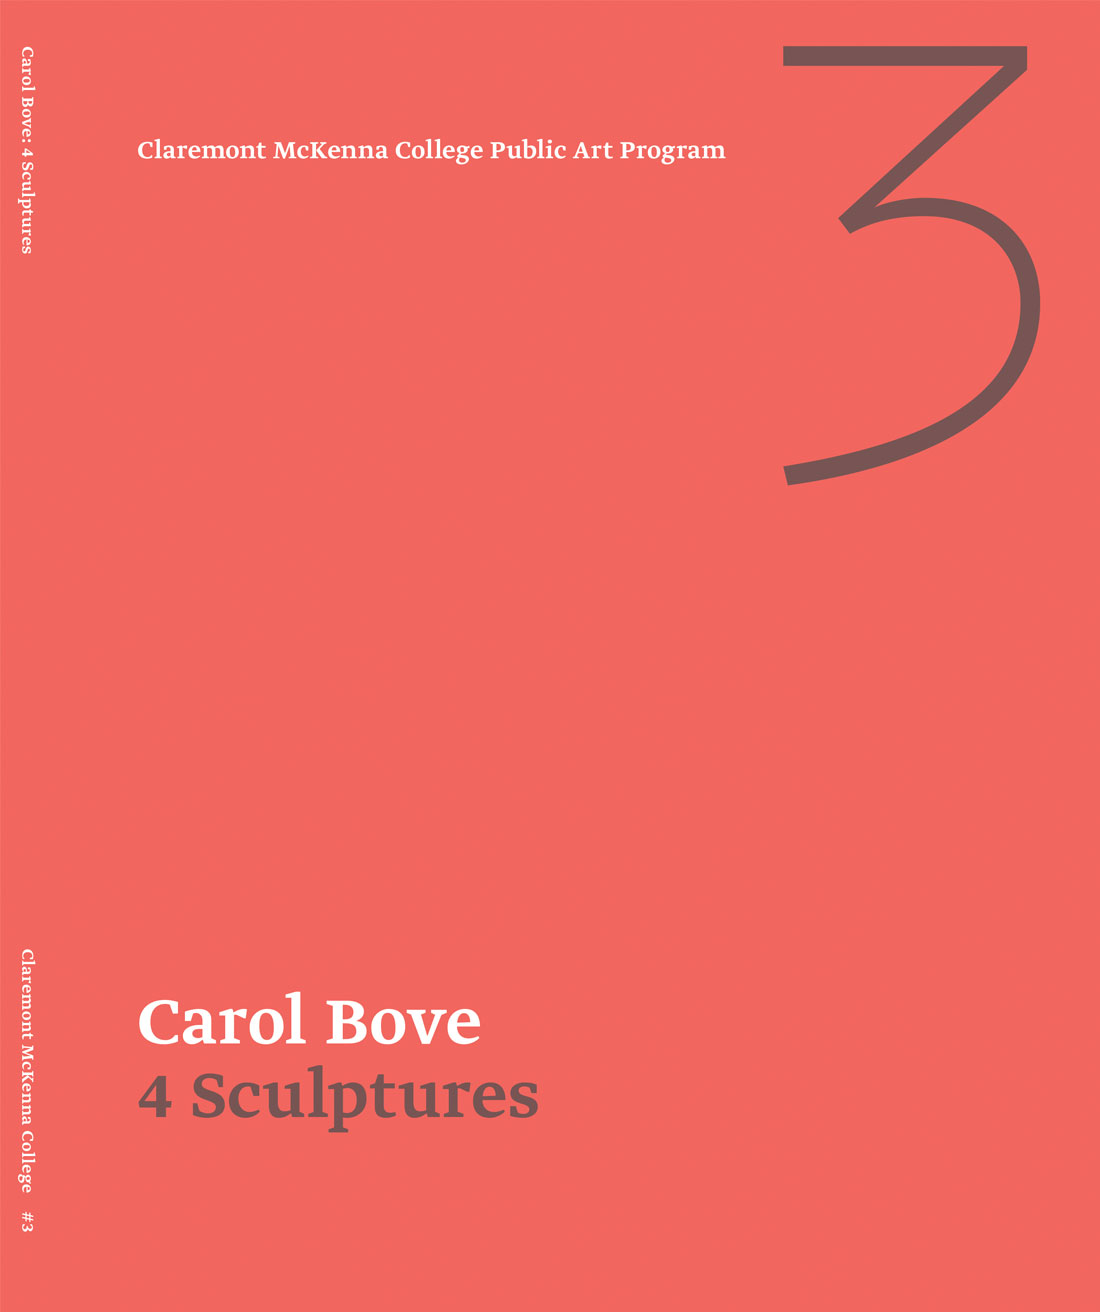 Foreword for Bove's sculptures.